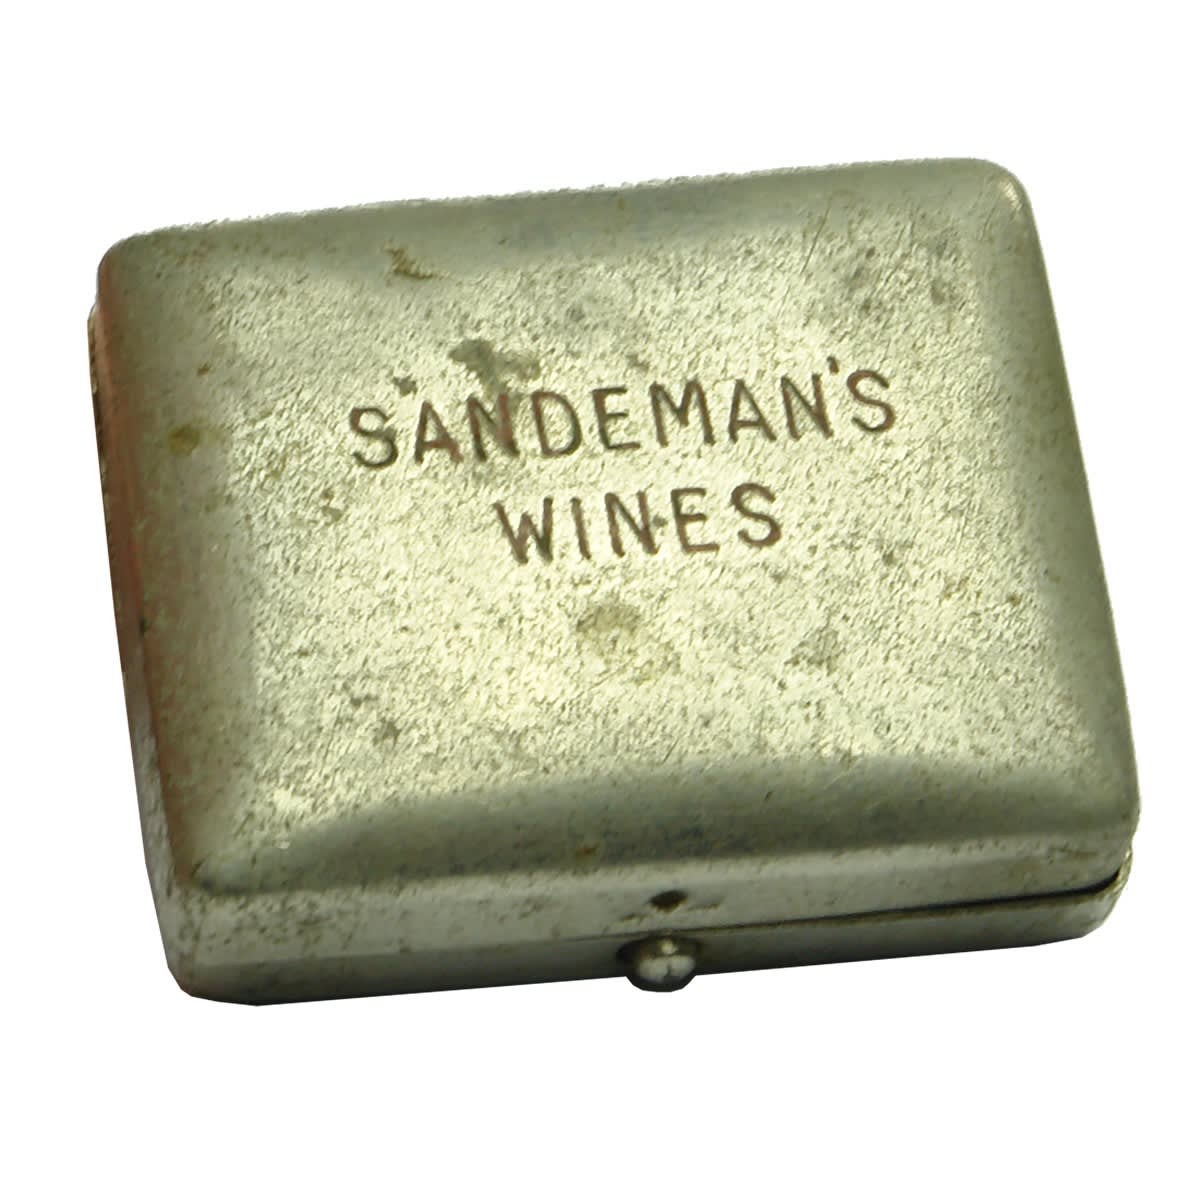 Tiny Case with two compartments. Sandemans Wines promotional item.